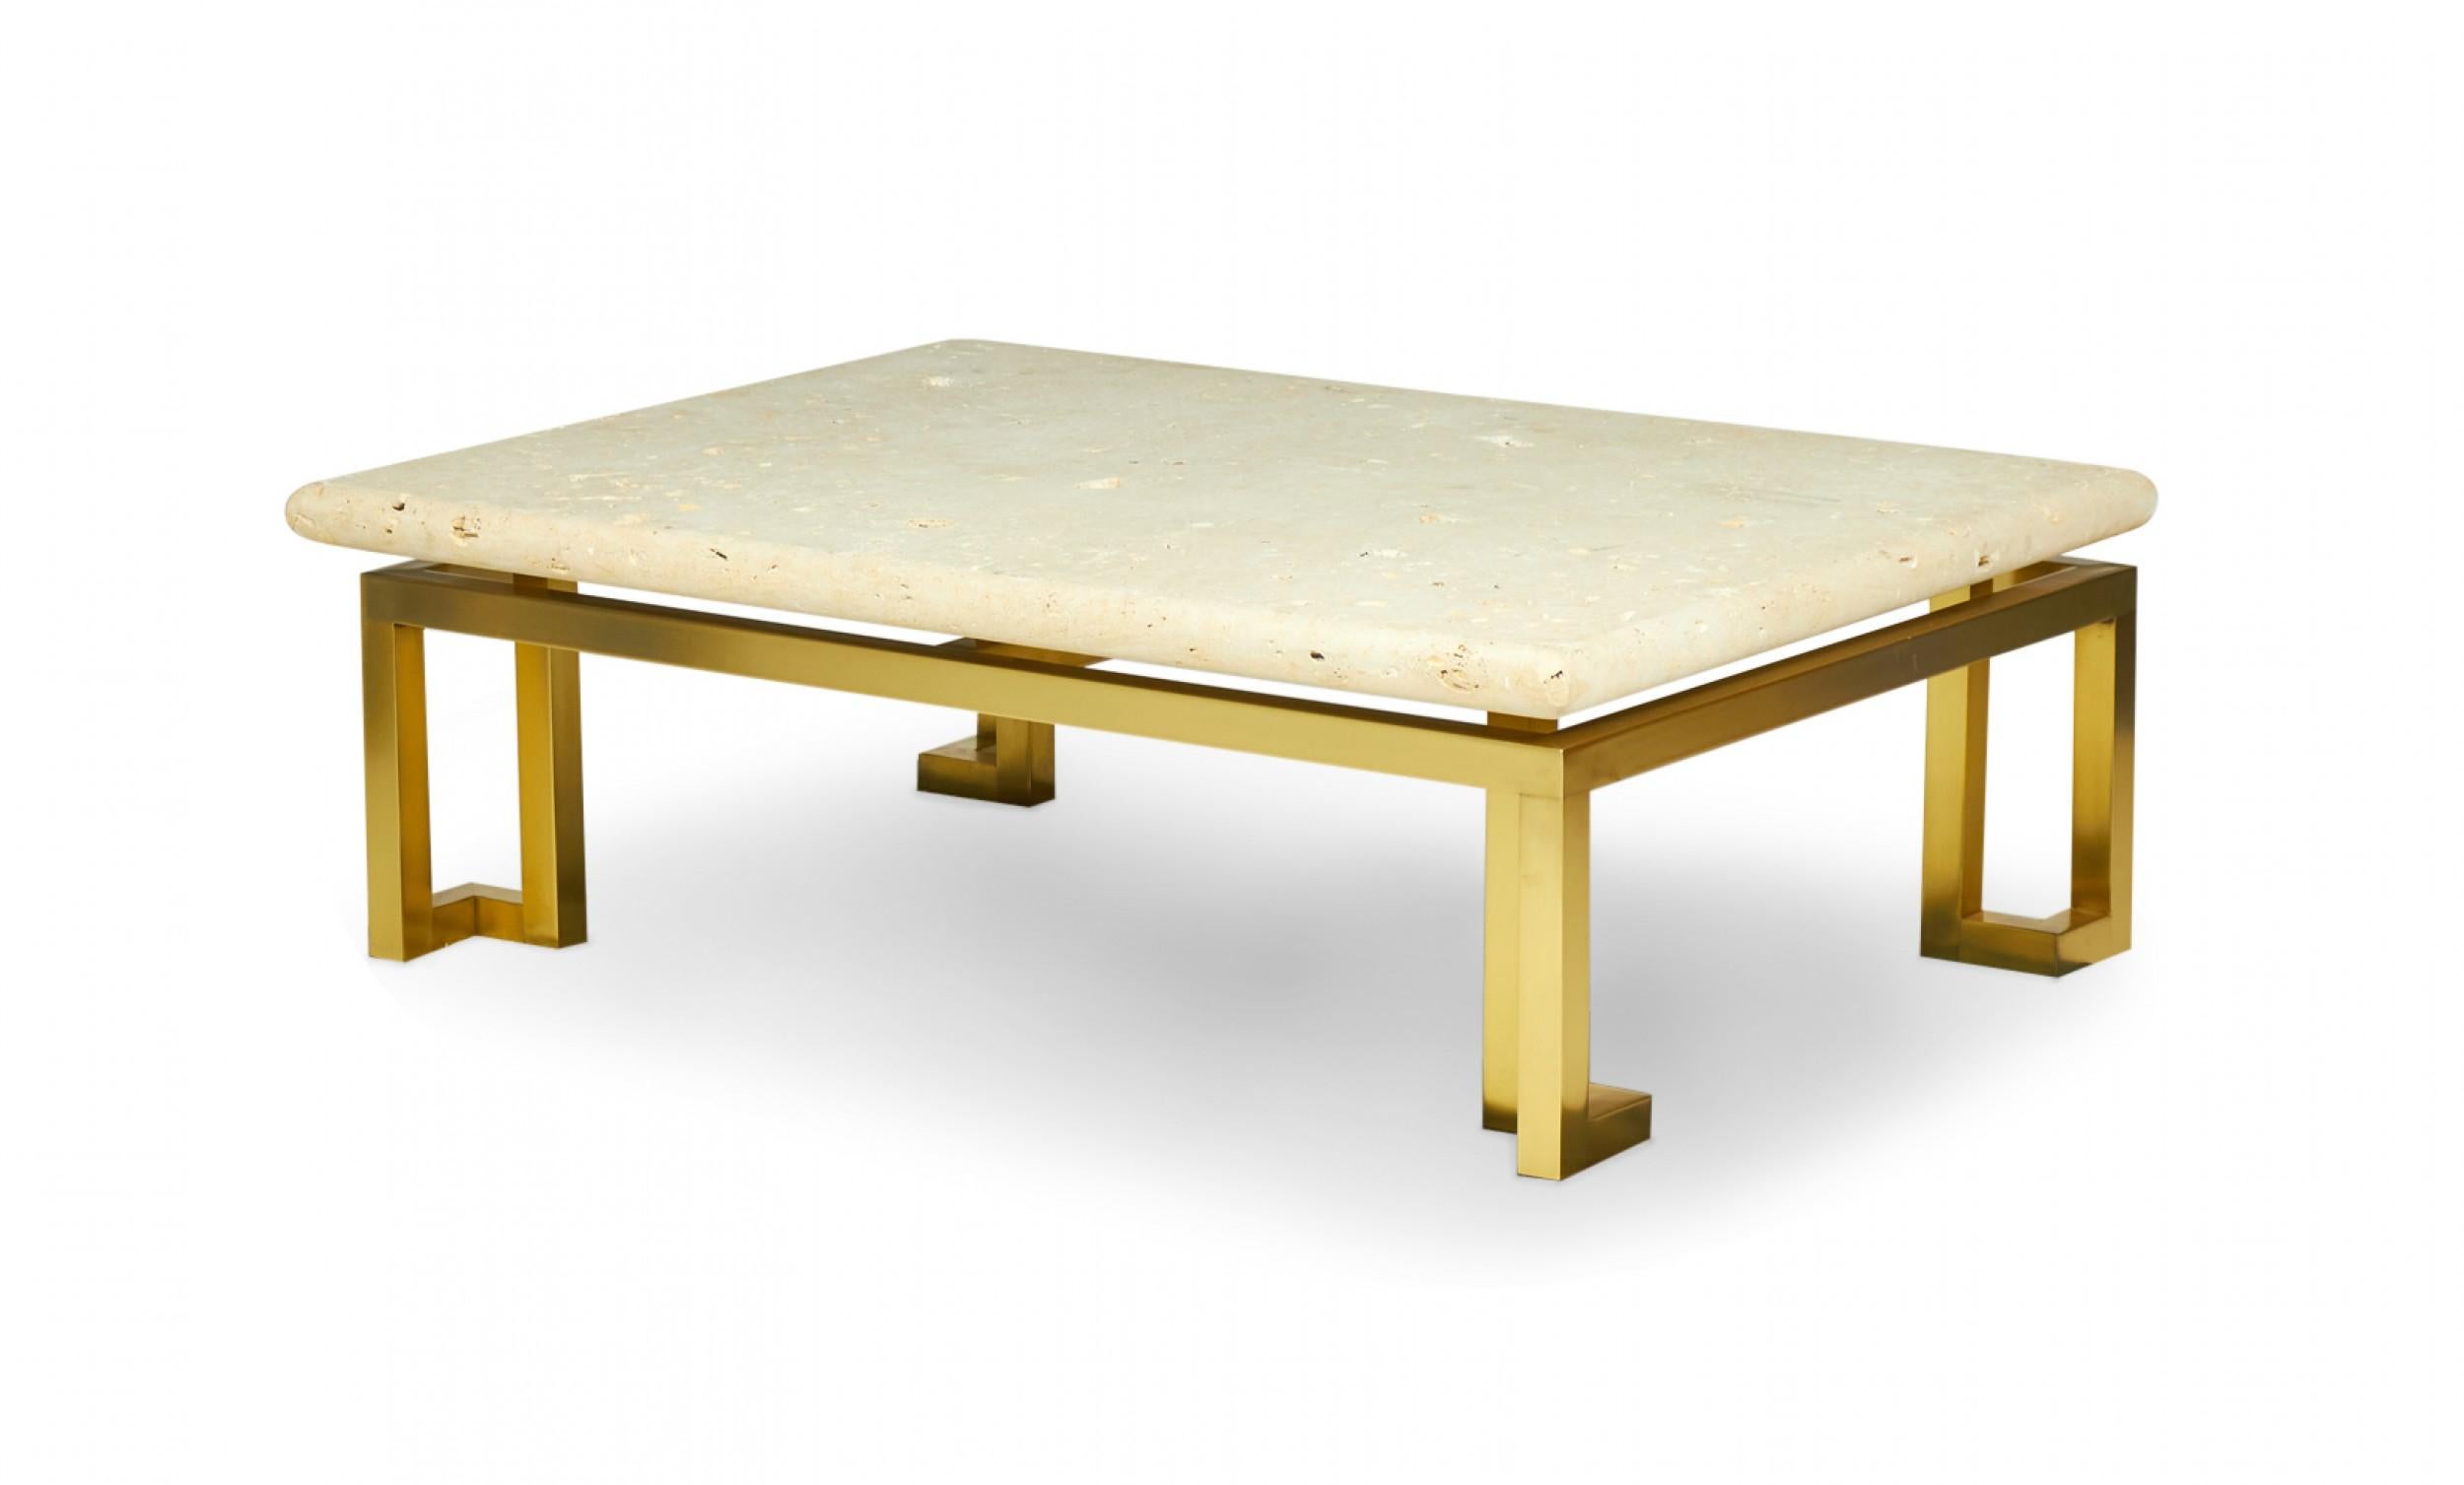 American High Style (circa 1980) rectangular coffee / cocktail table with a natural fossil stone top and a satin brass frame. (Luten, Clary, Stern, INC.)
  